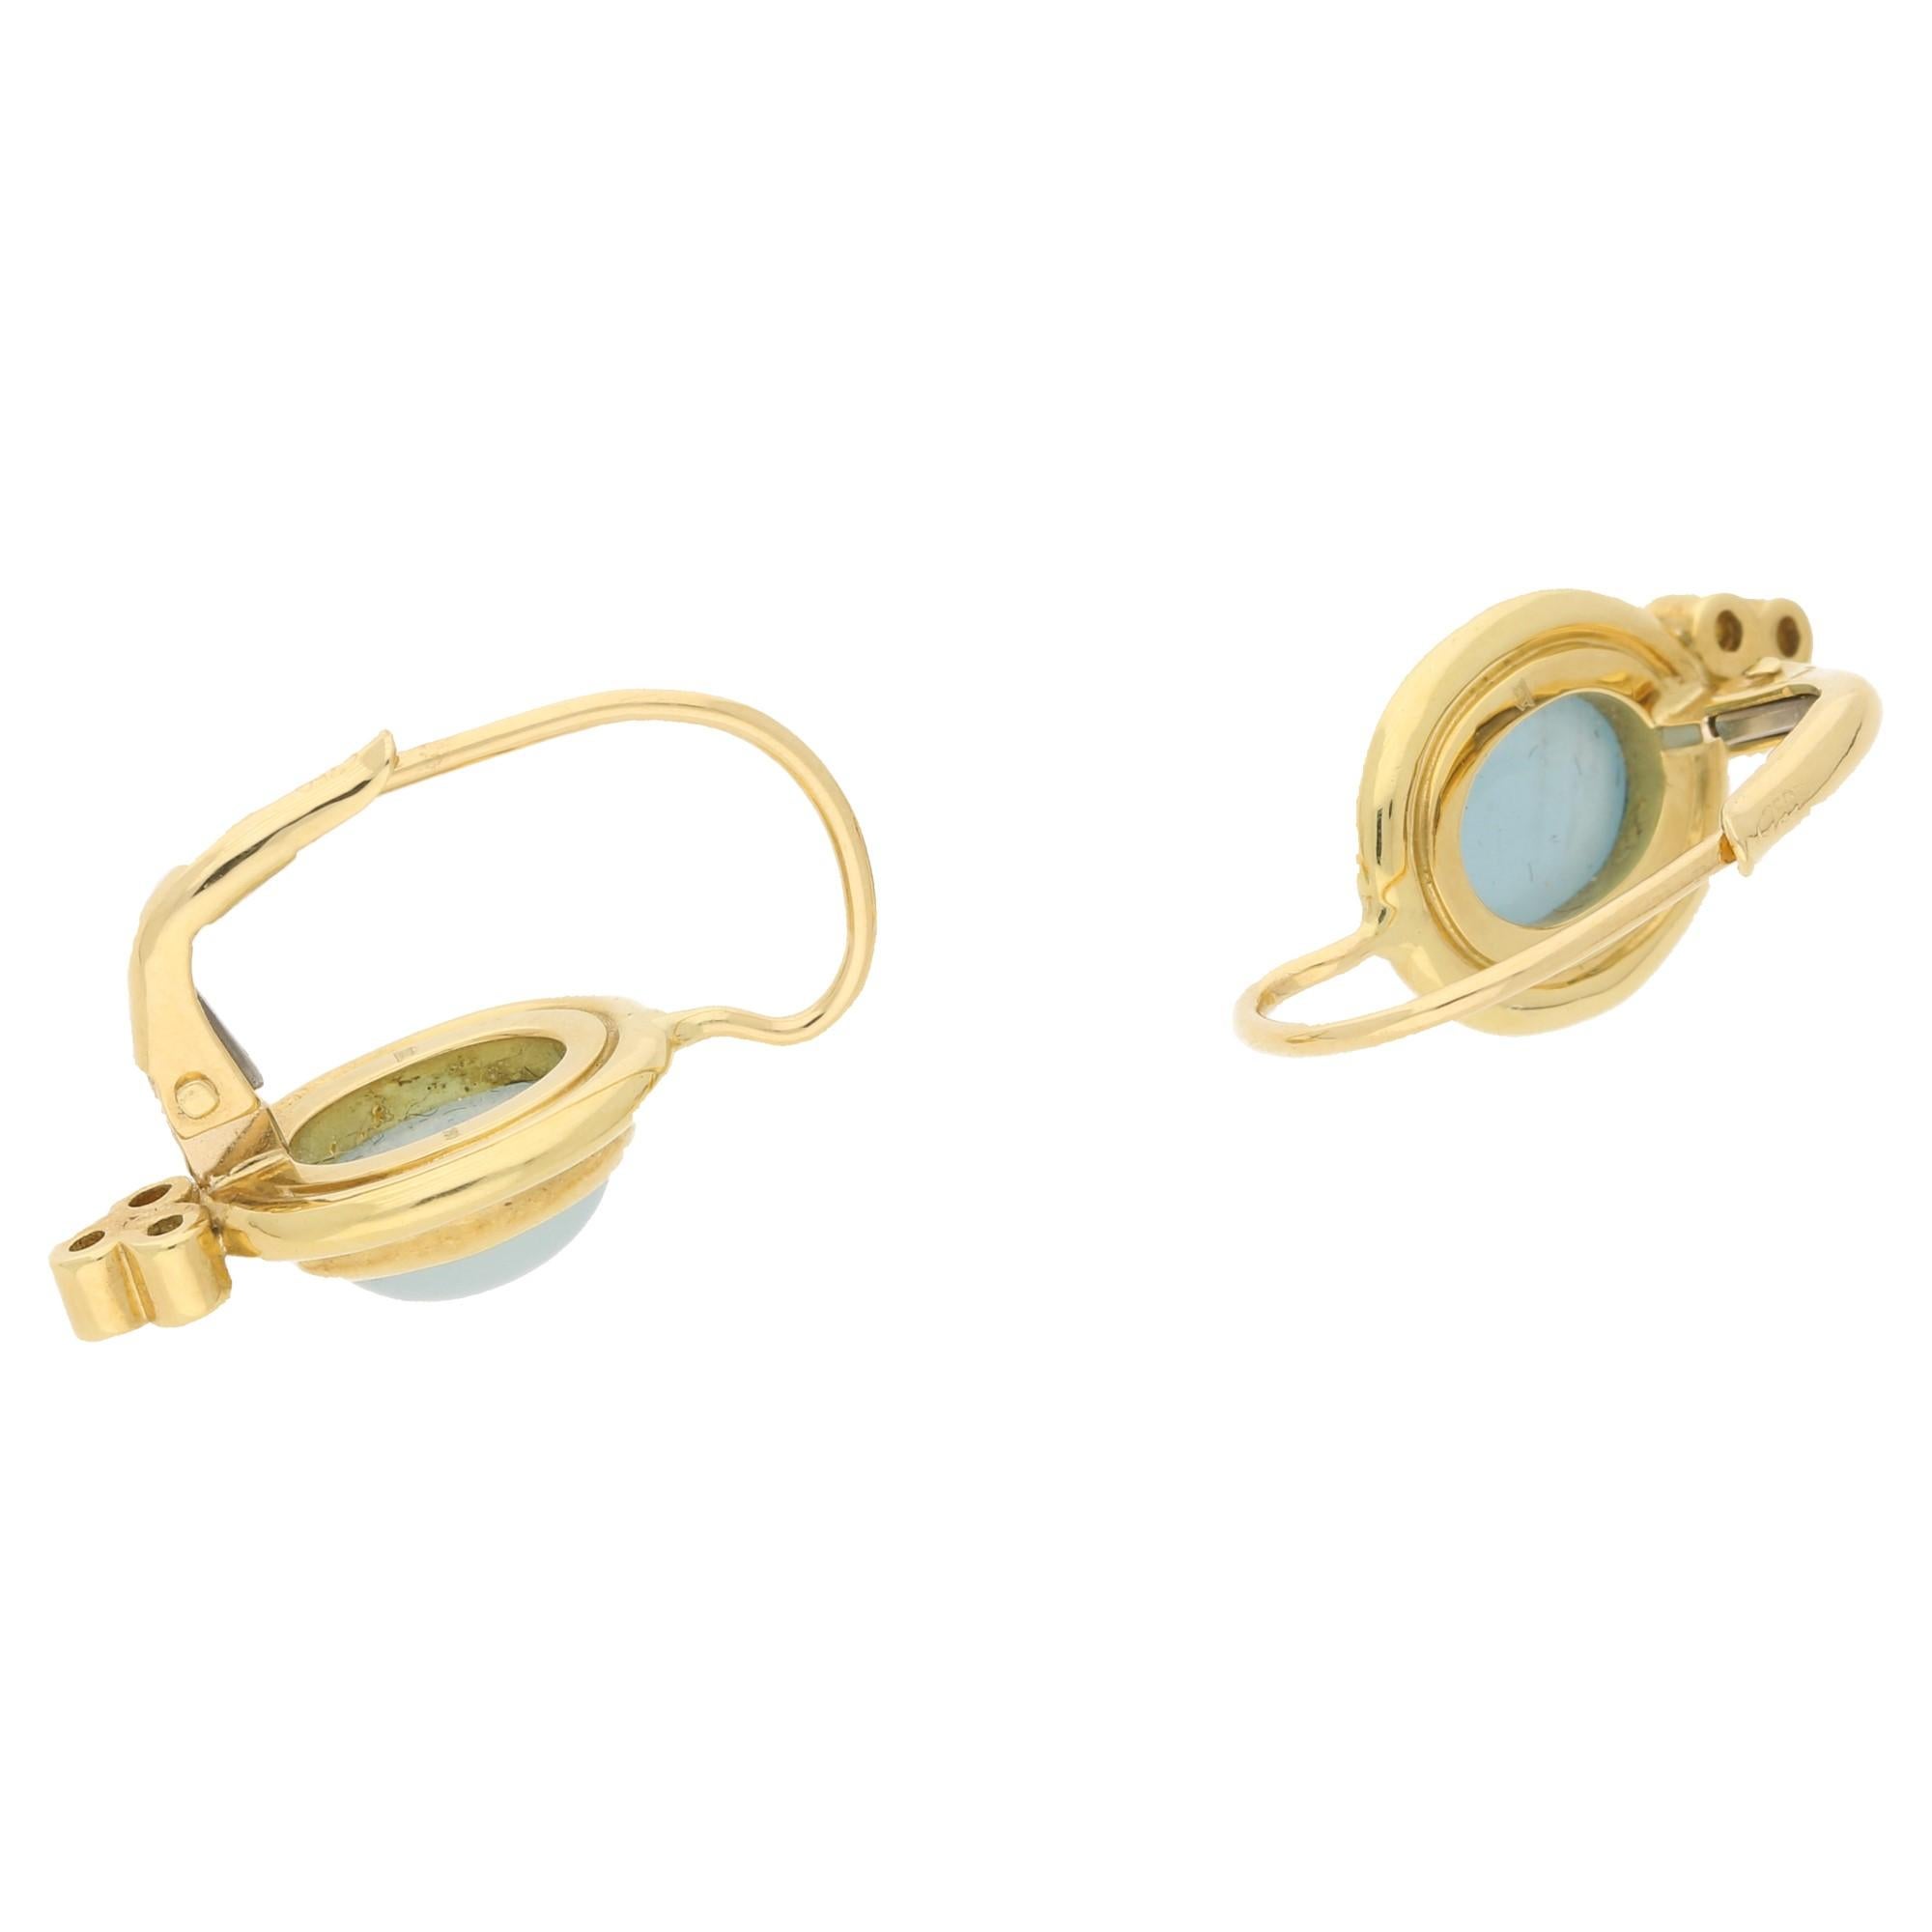 Temple St Clair classical aquamarine cabochon and diamonds drop earring in 18ct yellow gold with lever back fittings, featuring a central 8mm oval aquamarine cabochon rubover set in a border surround with three round brilliant cut diamonds rubover